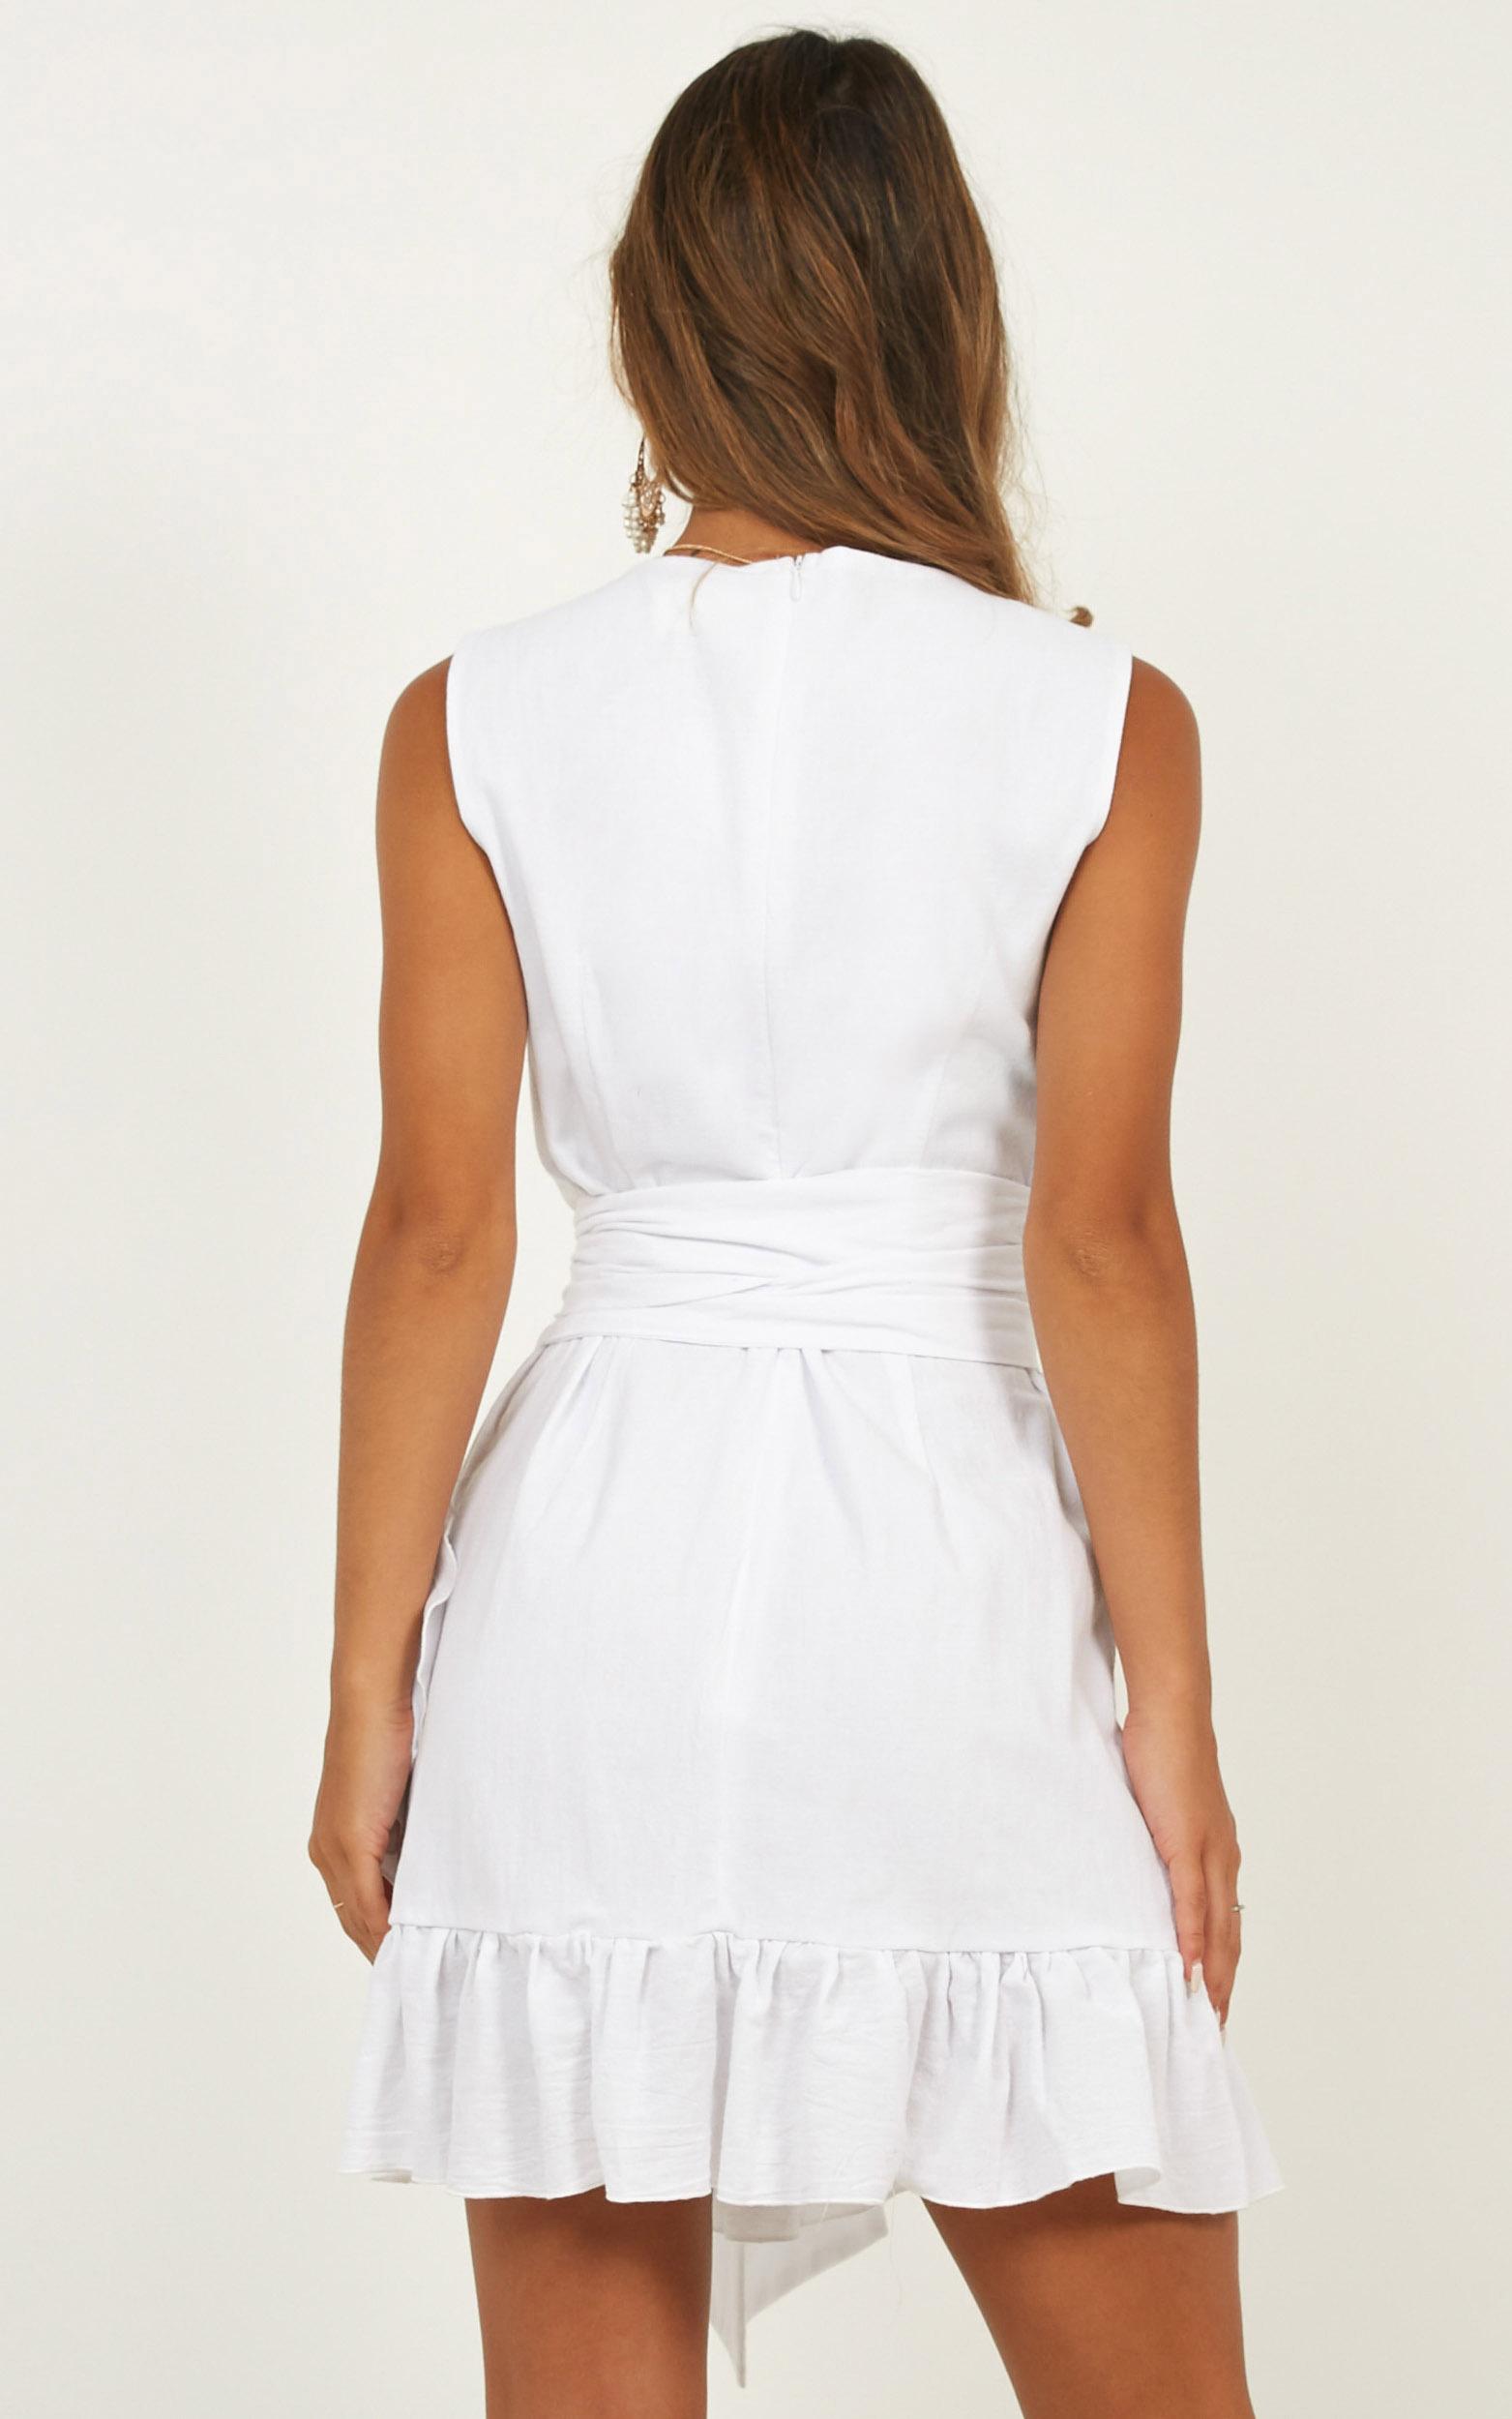 Slow Searching Dress in white - 18 (XXXL), White, hi-res image number null